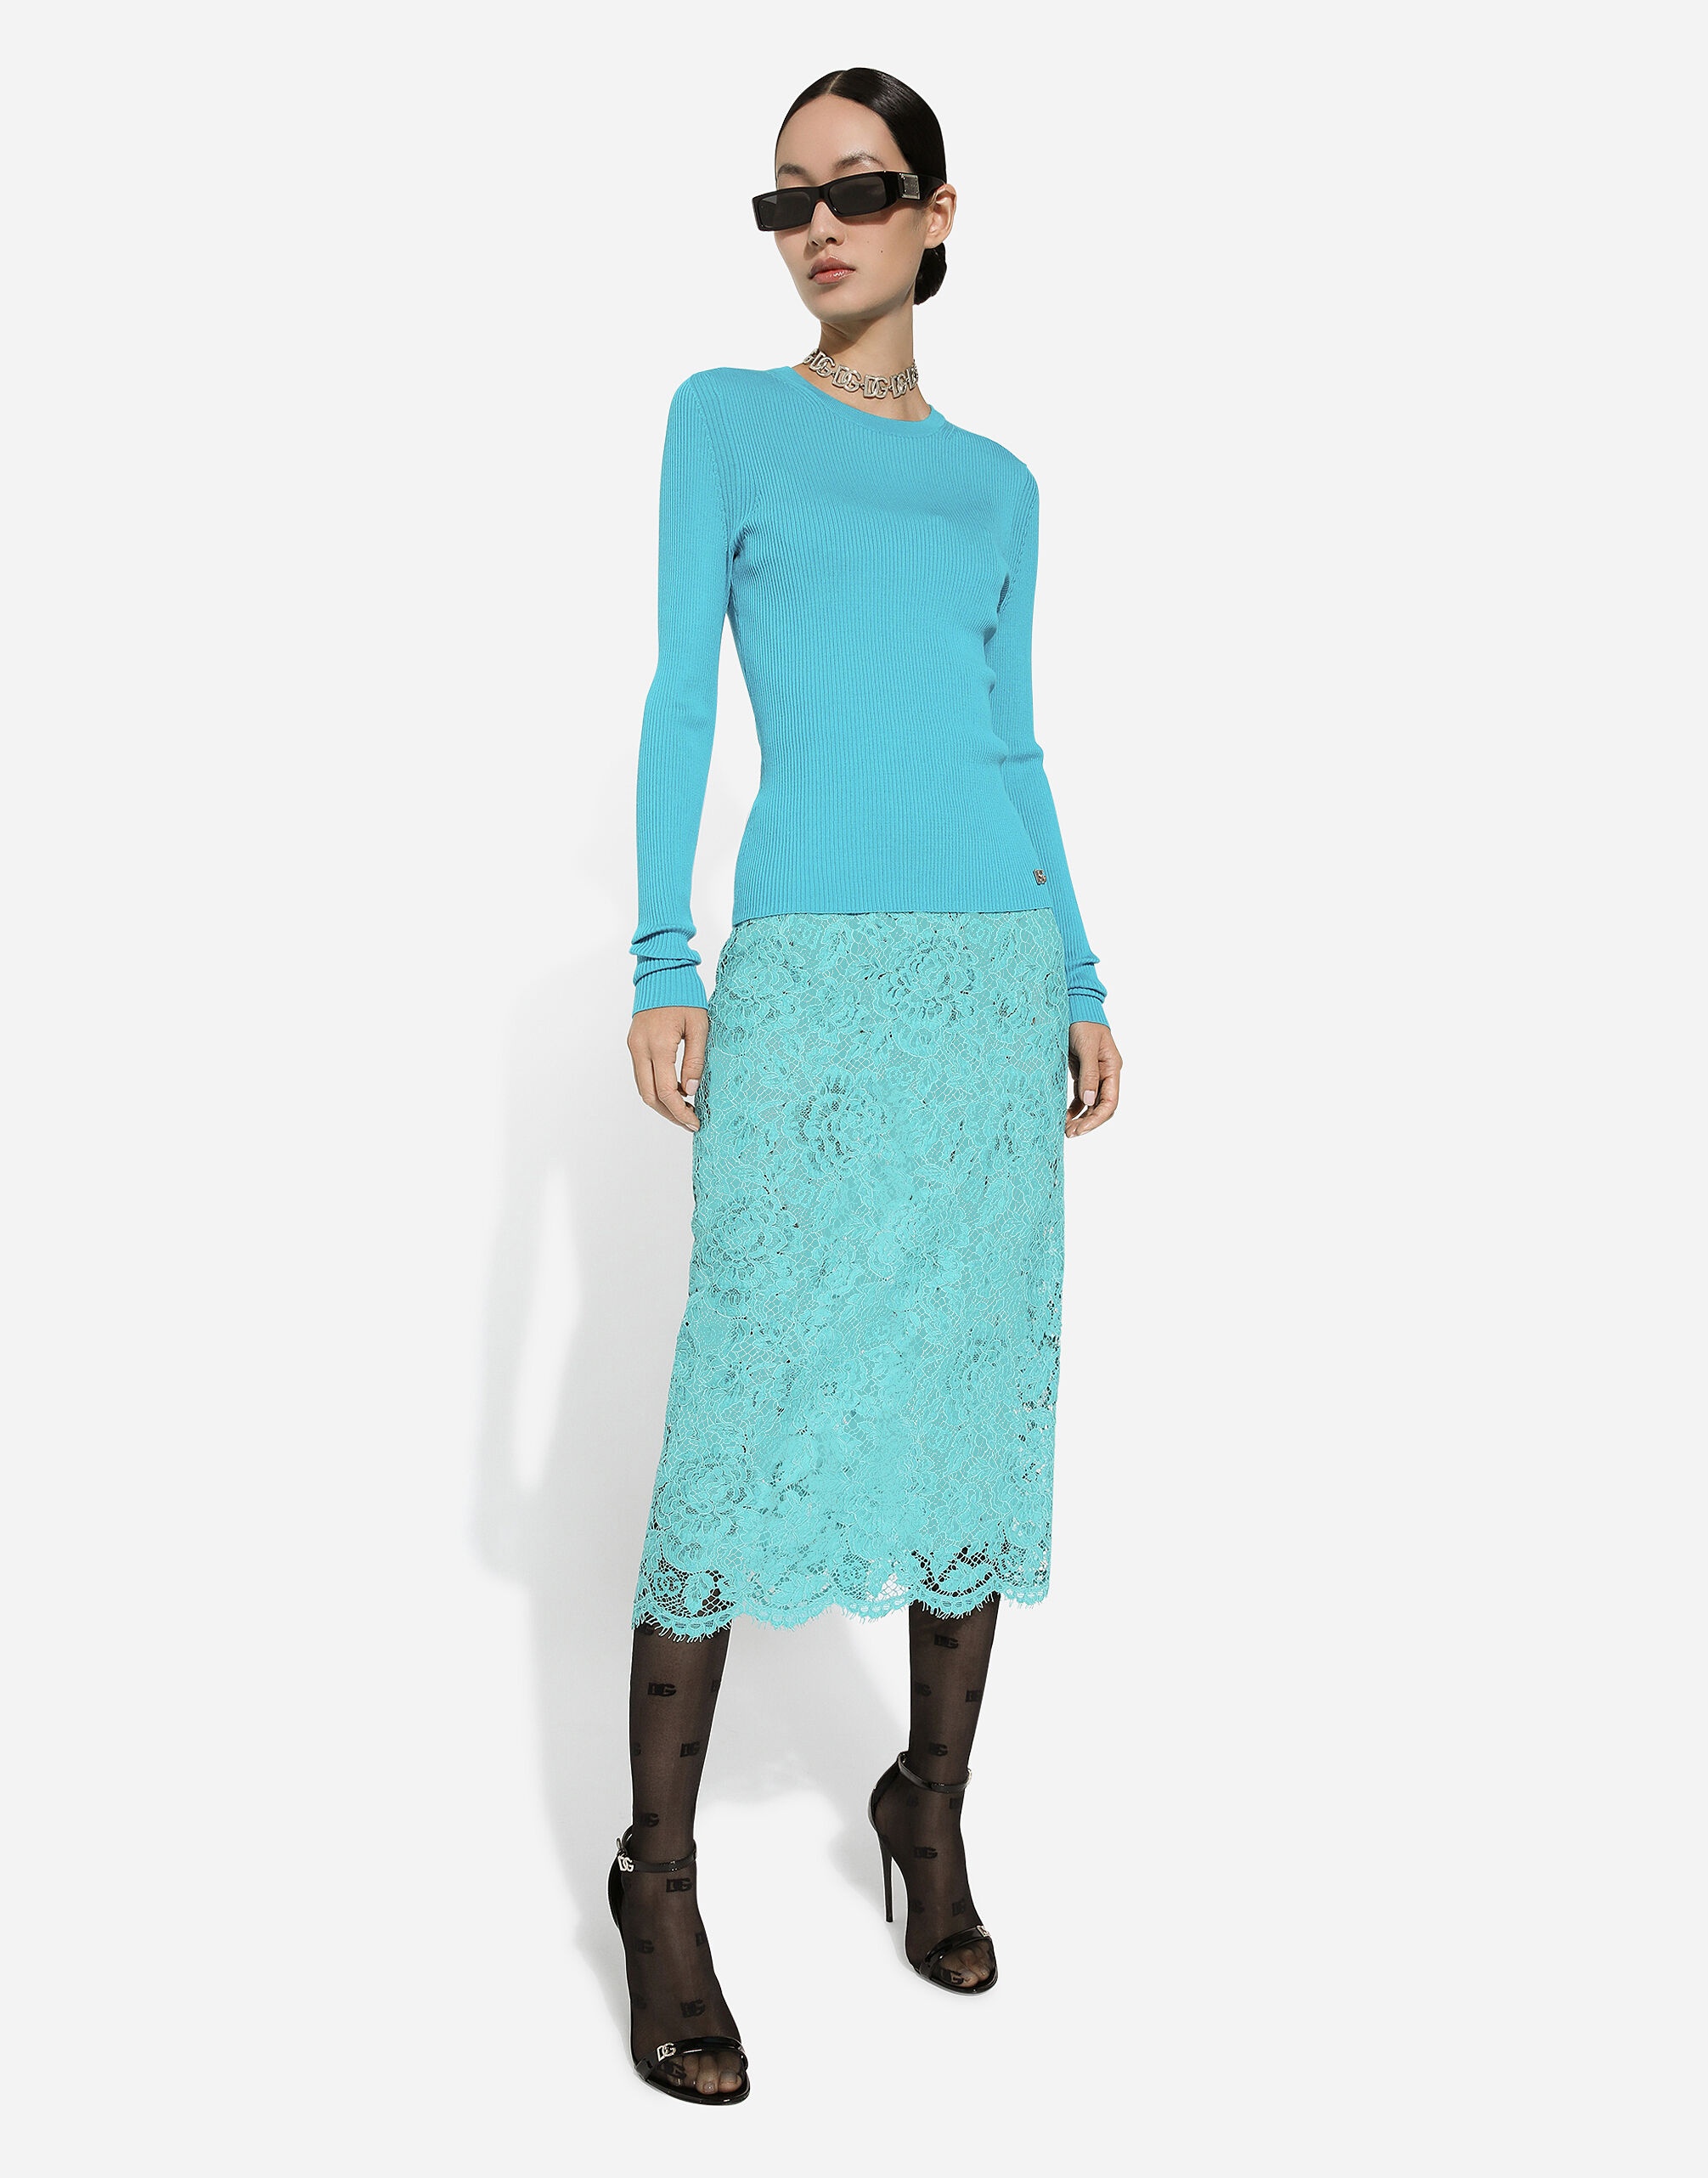 Branded floral cordonetto lace pencil skirt - 5